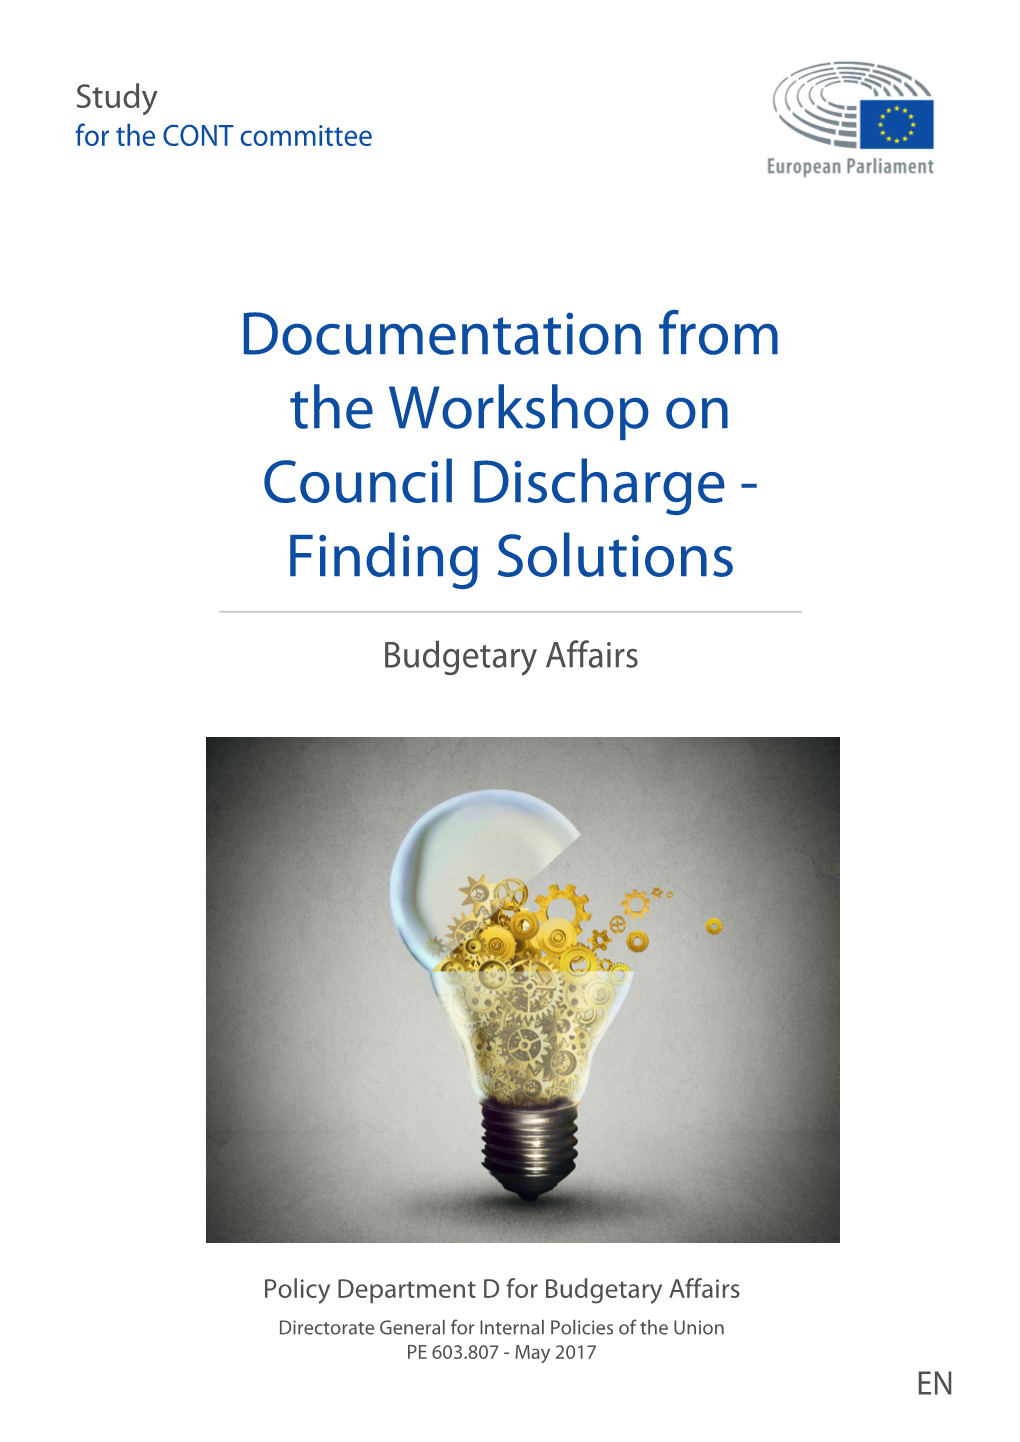 Documentation from the Workshop on Council Discharge - Finding Solutions